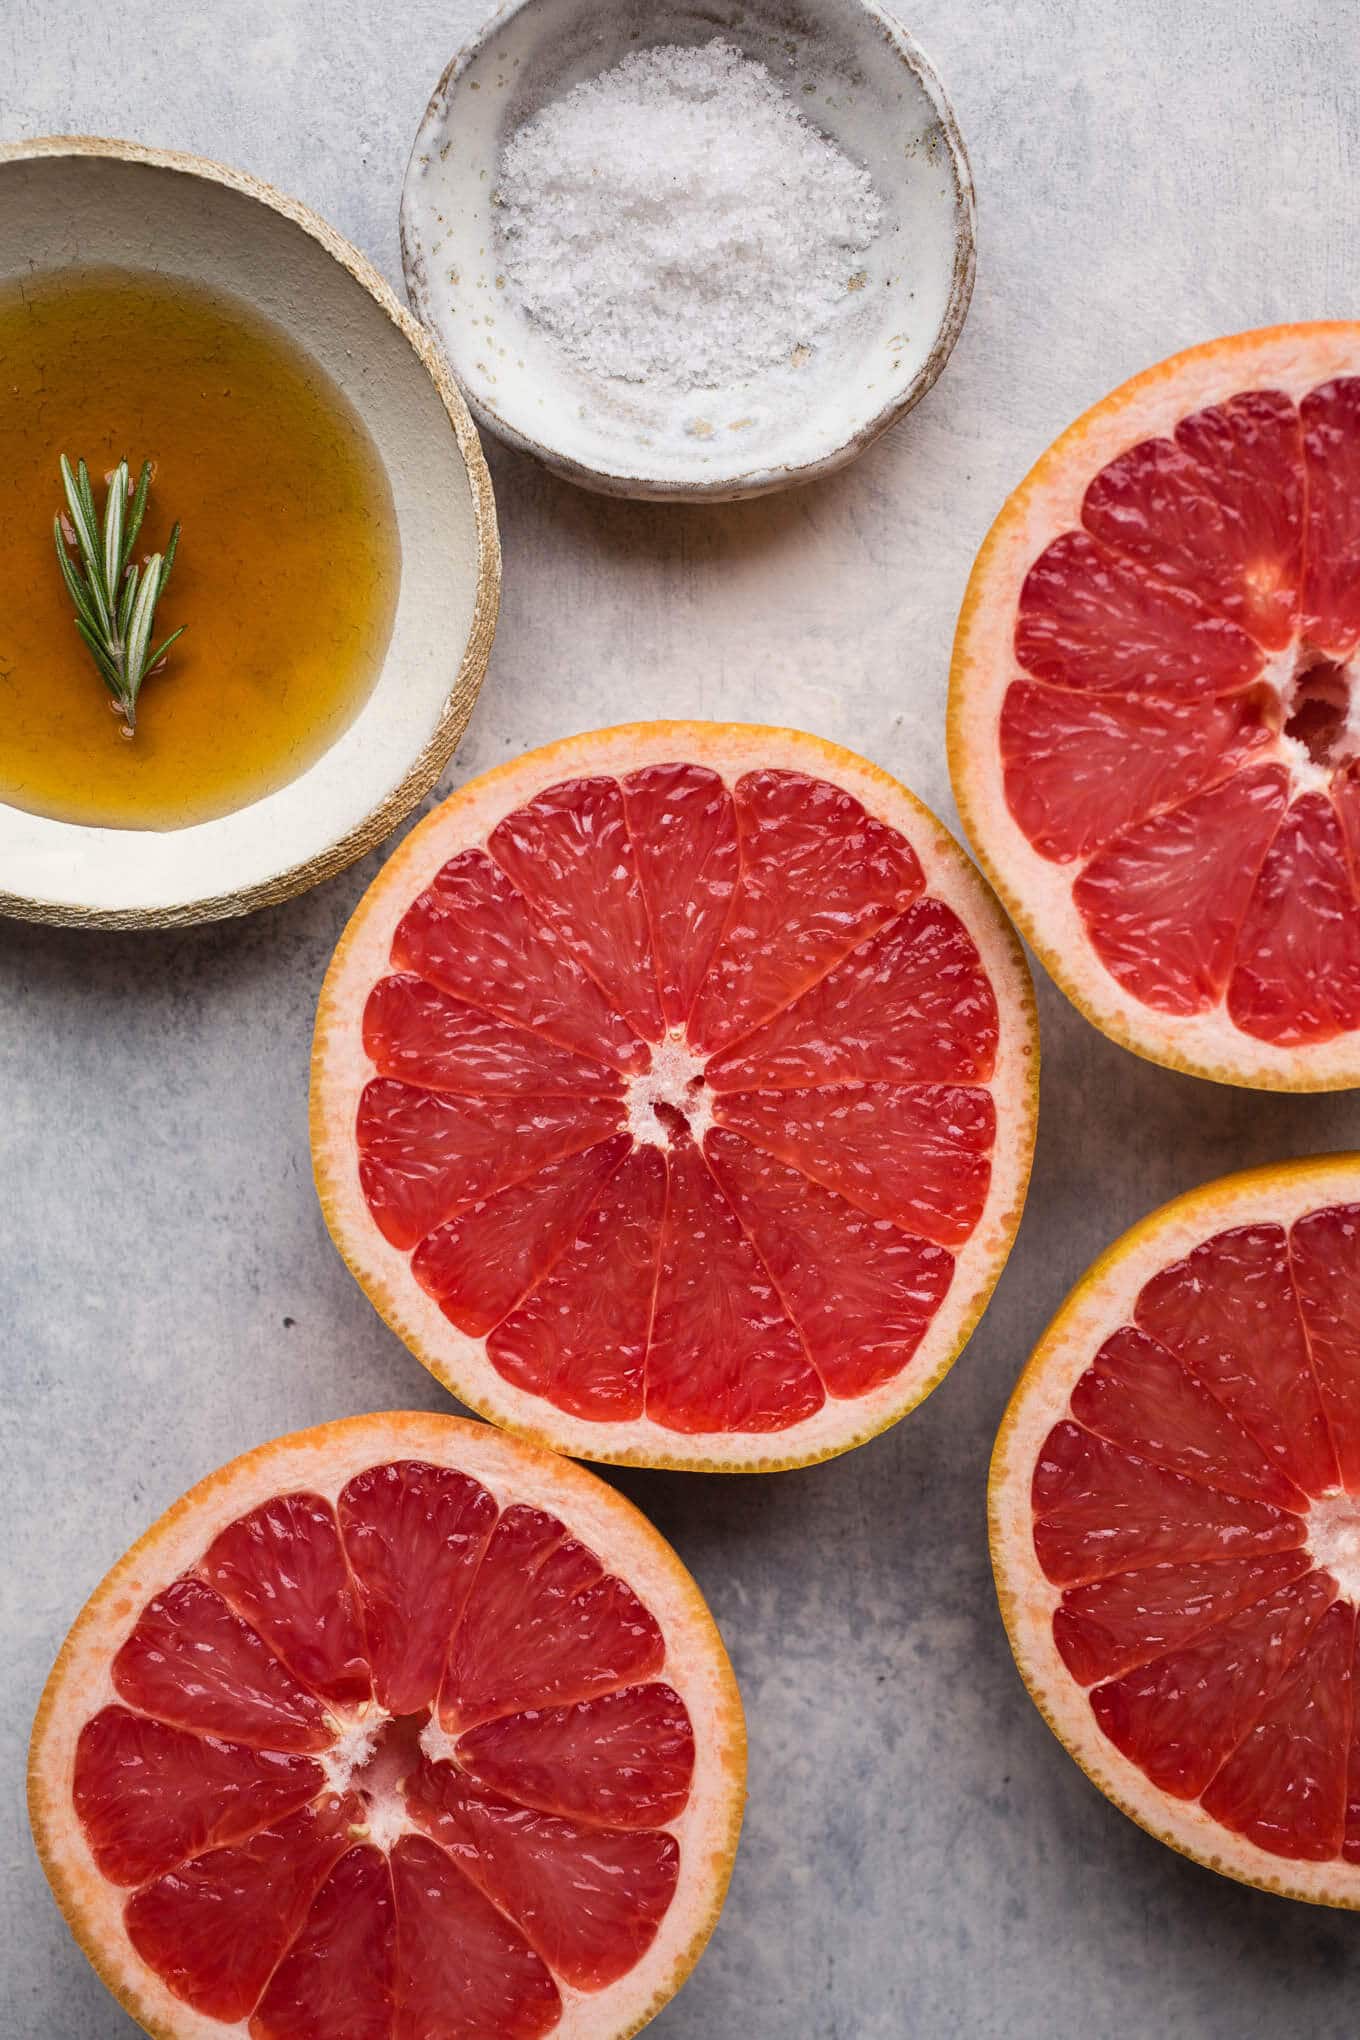 Broiled grapefruit with maple syrup, rosemary, and sea salt make for a delicious sweet and salty breakfast or brunch option. Gluten-free, vegan.